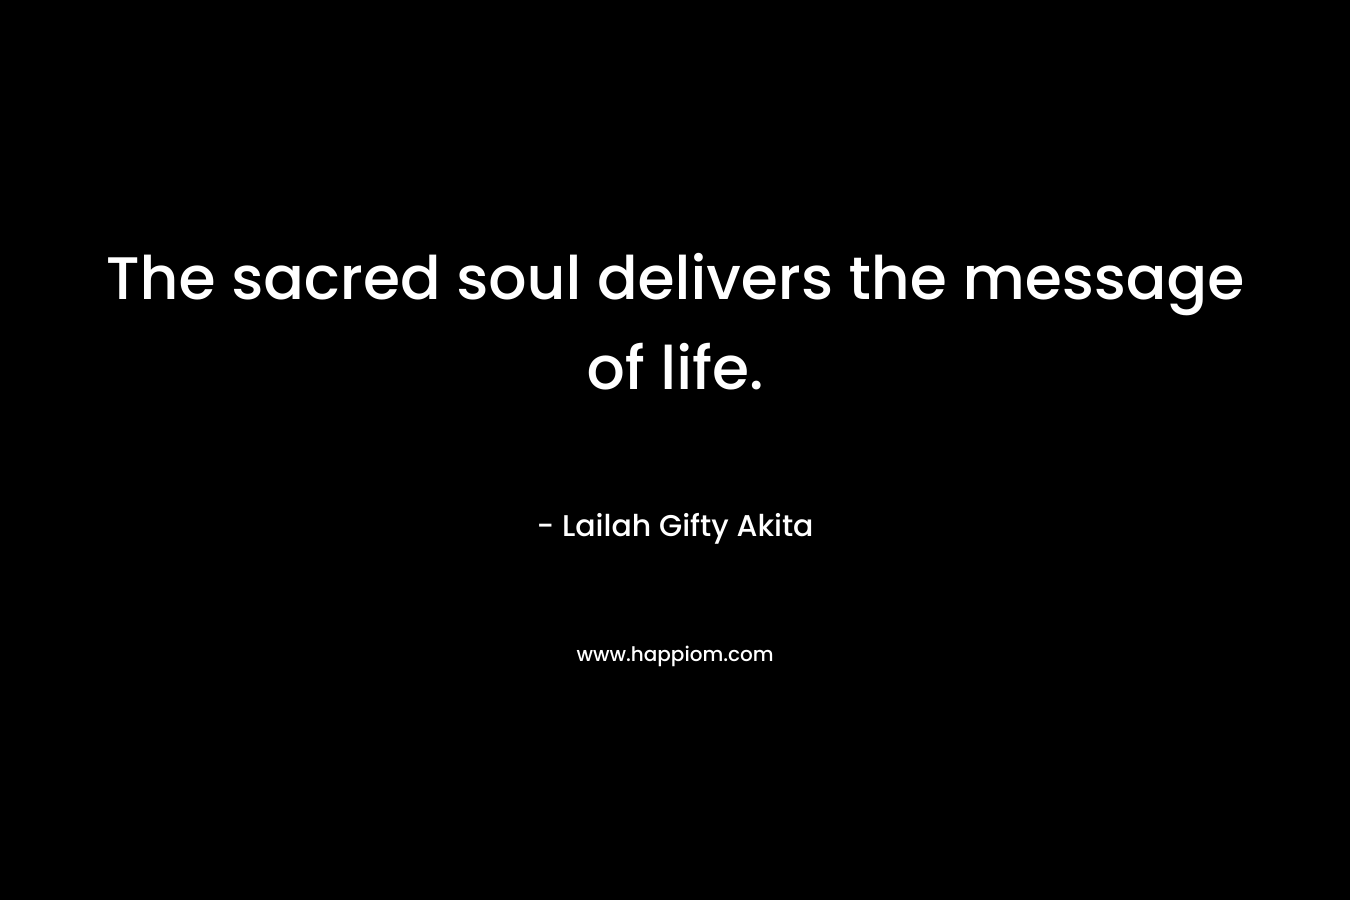 The sacred soul delivers the message of life.